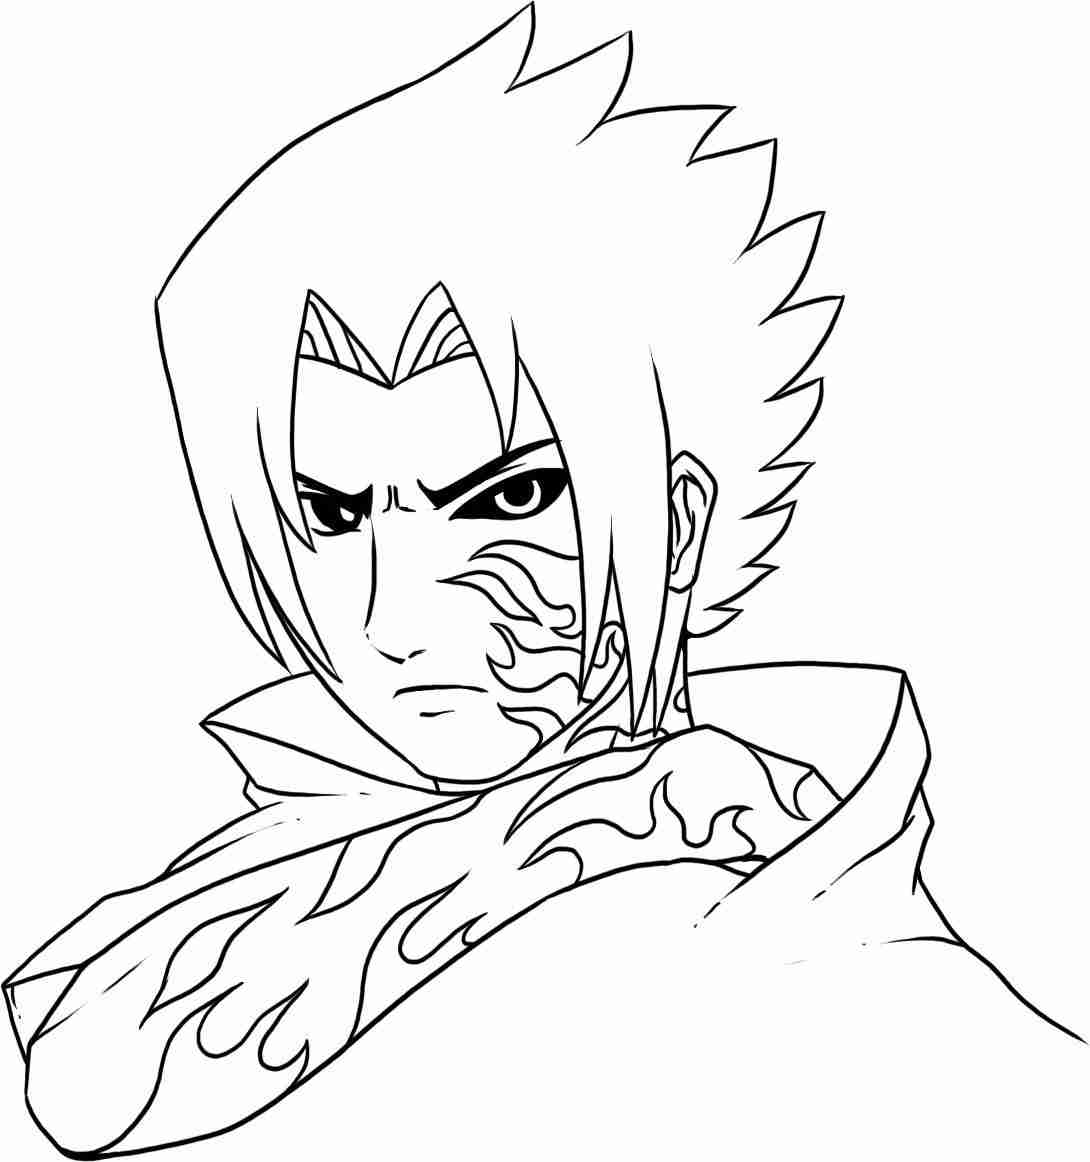 Sasuke filled a half of special Curse Mark on his face and arm Coloring Pages